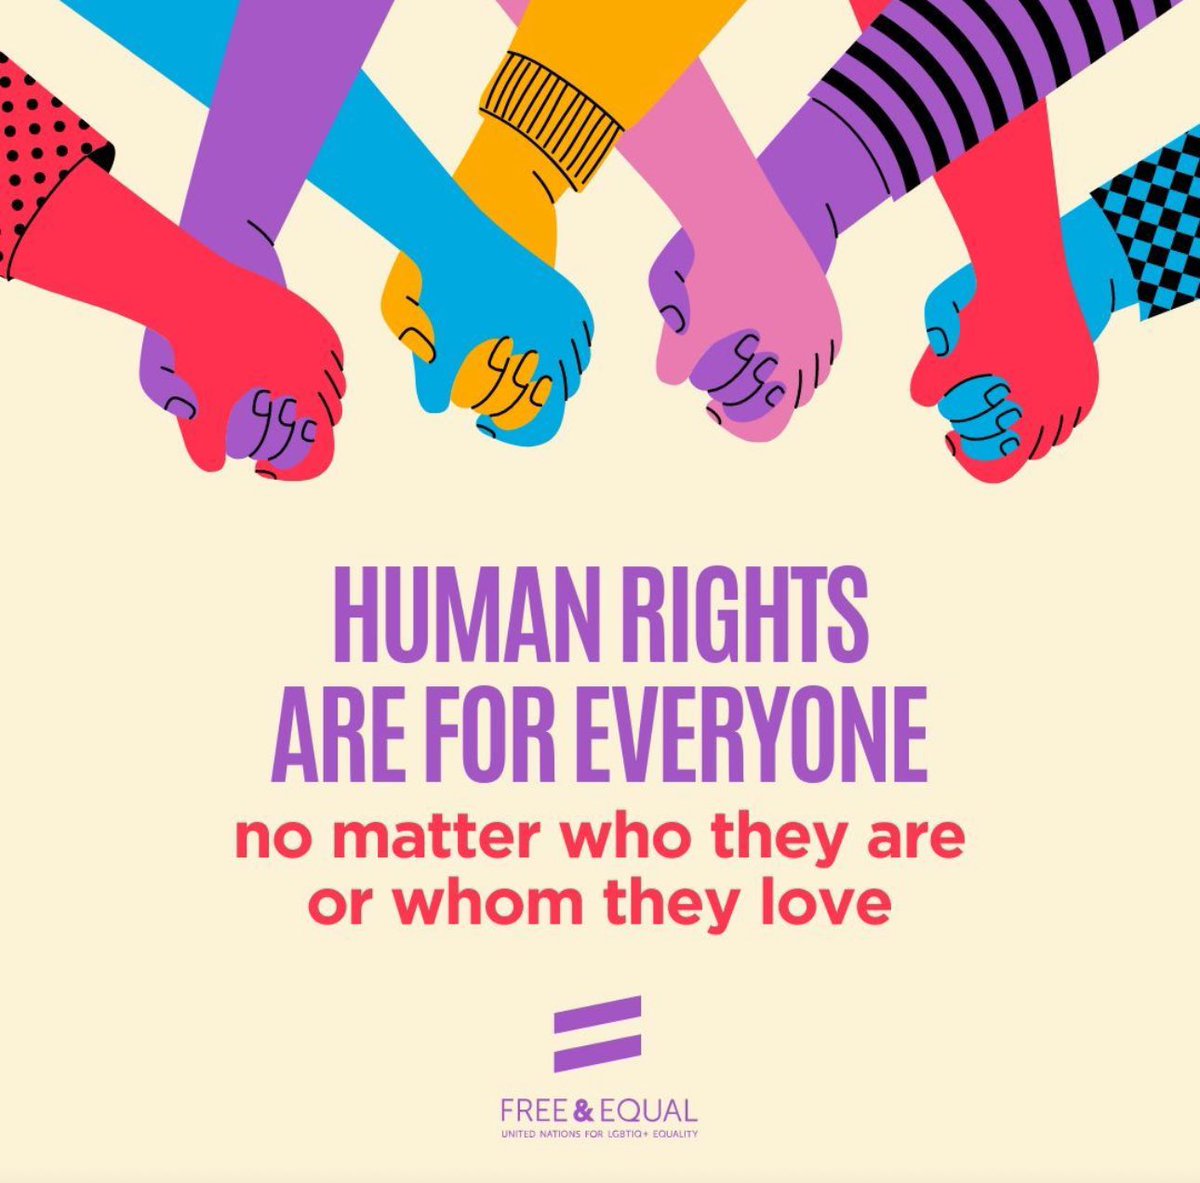 Promote and protect human rights for all to ensure no one is discriminated against or left behind. #IDAHOBIT